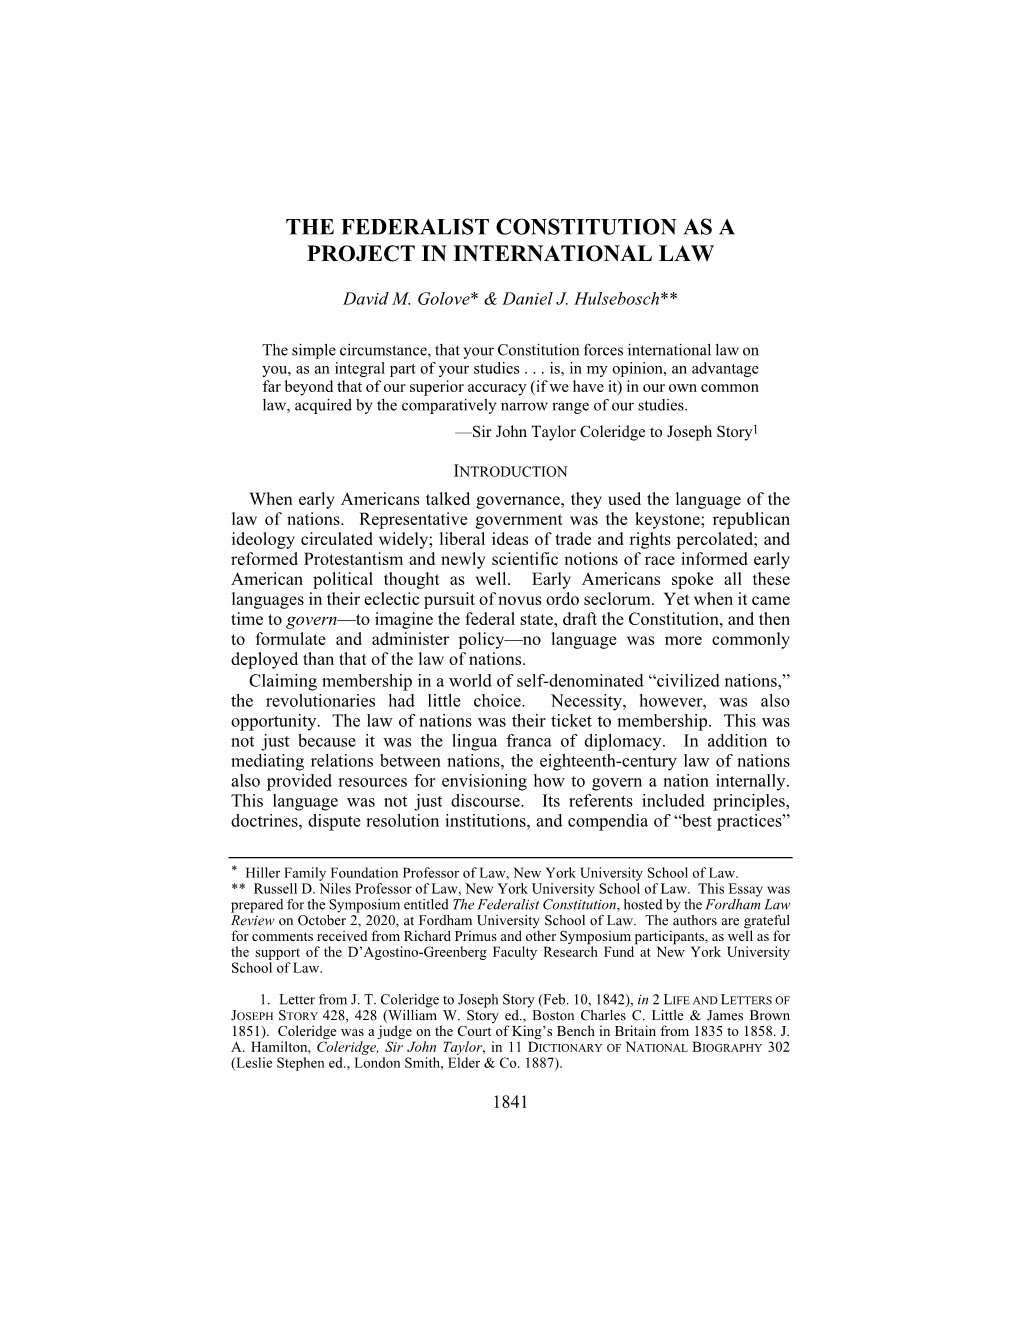 The Federalist Constitution As a Project in International Law